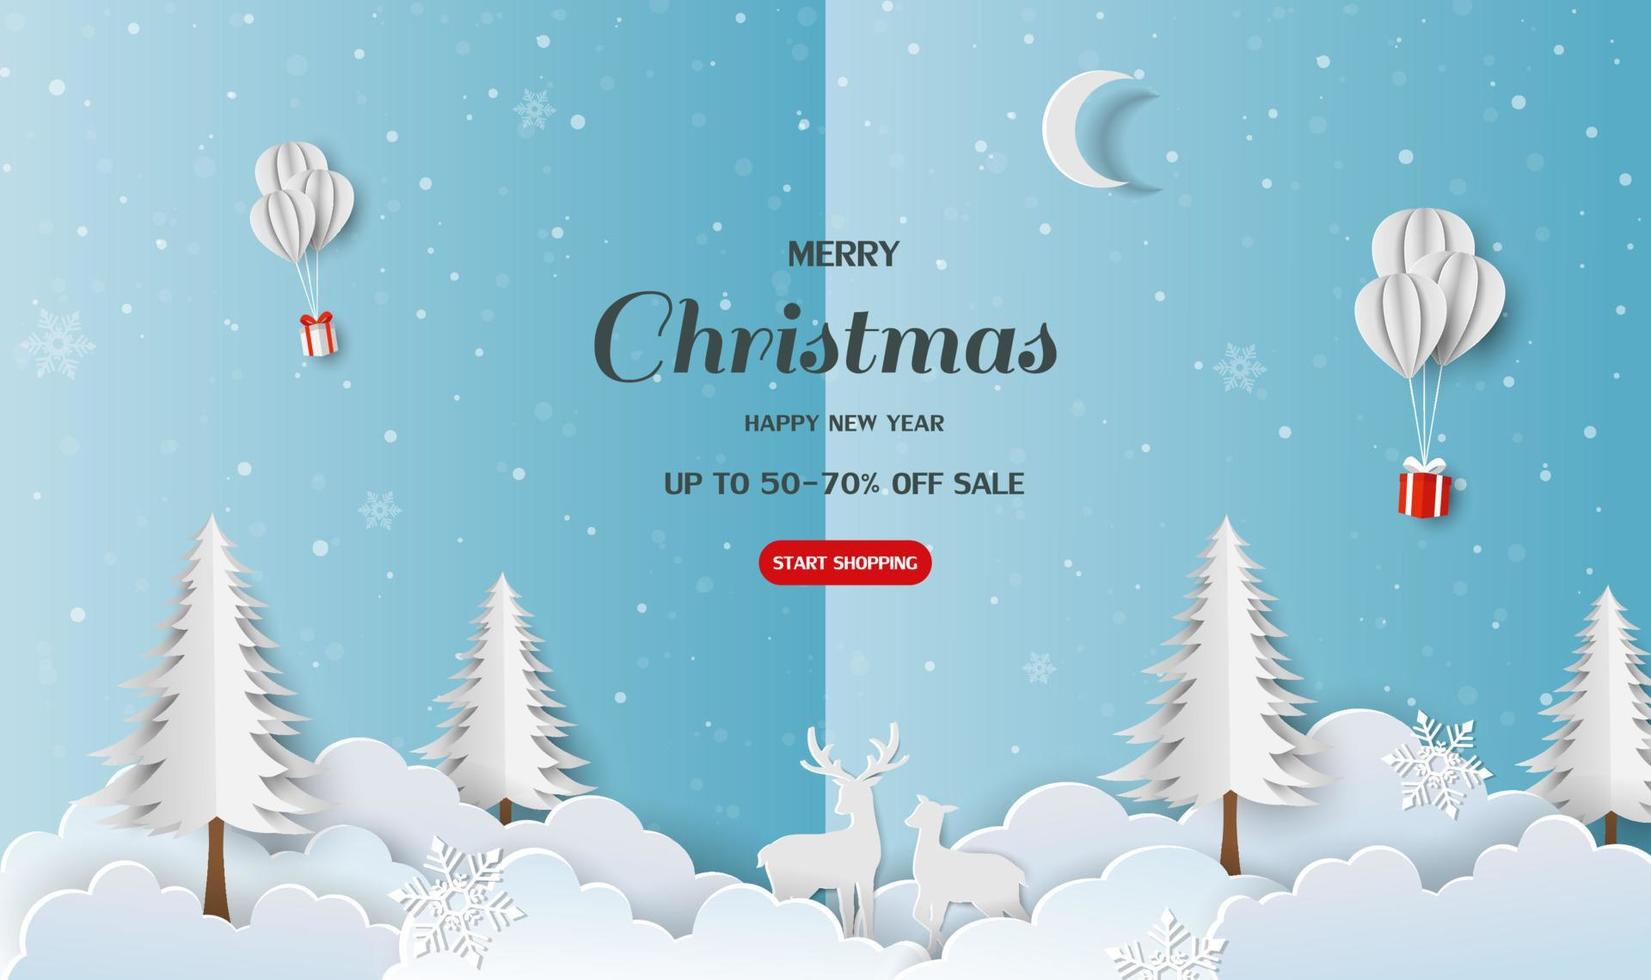 Winter sale banner background for festive decoration on paper cut and craft style vector